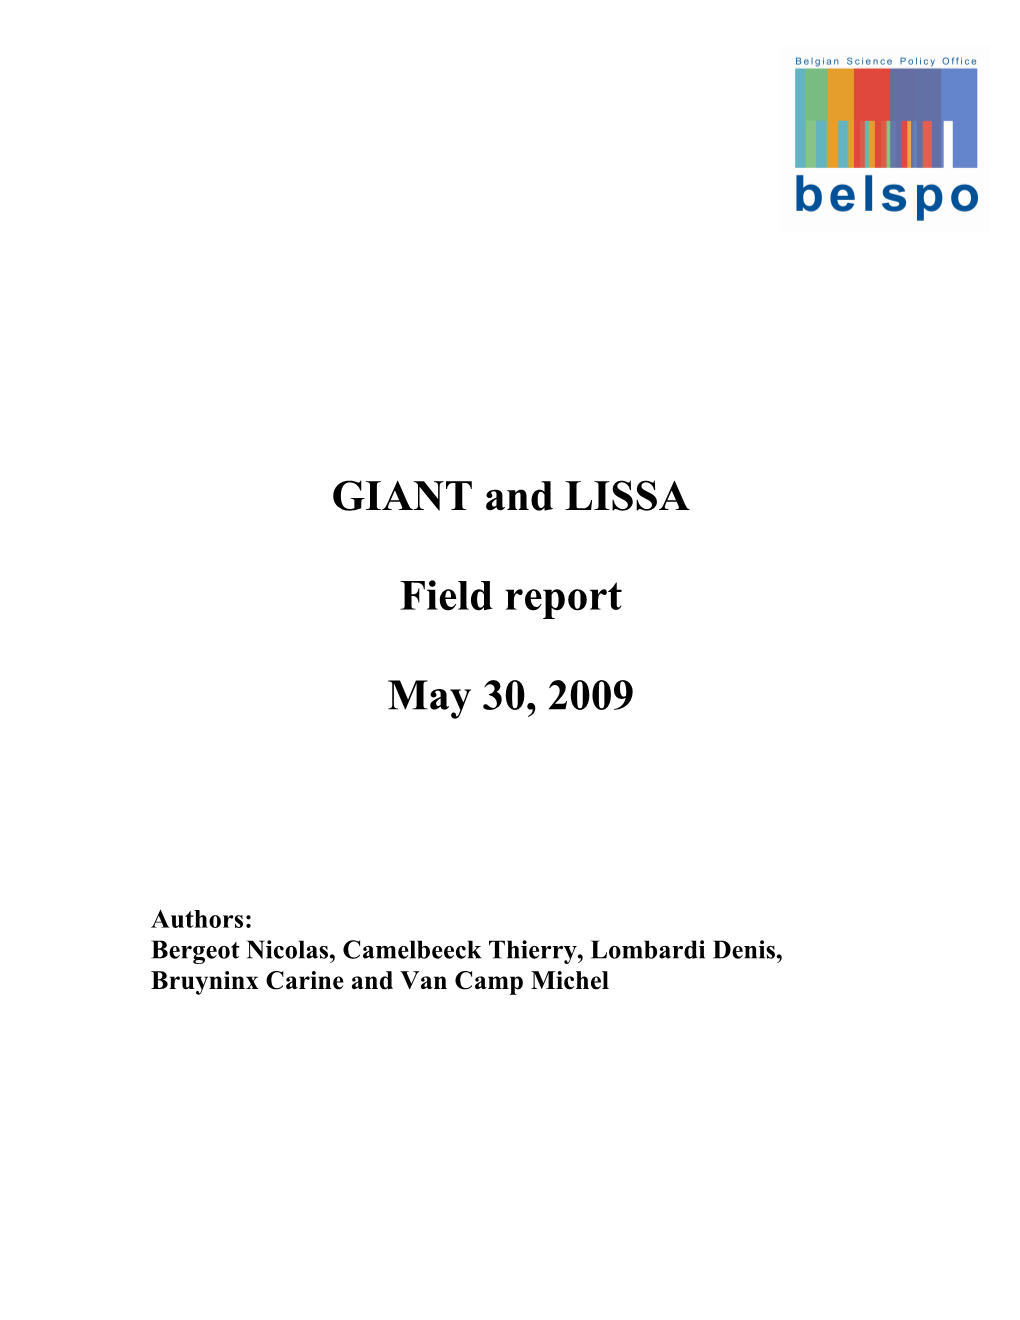 GIANT and LISSA